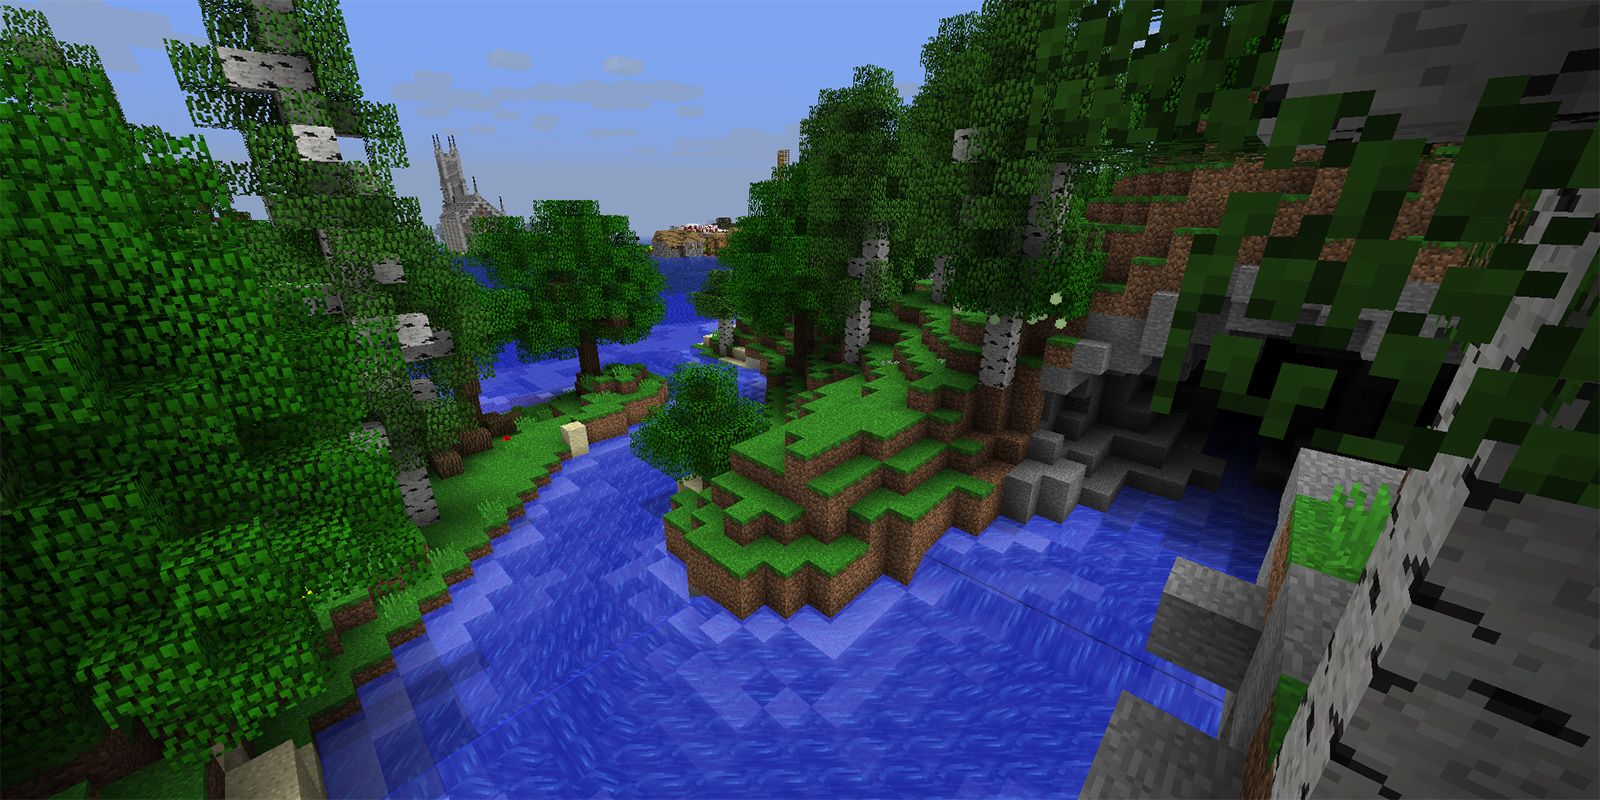 Minecraft Update Concept Envisions New Waterfalls & Rivers